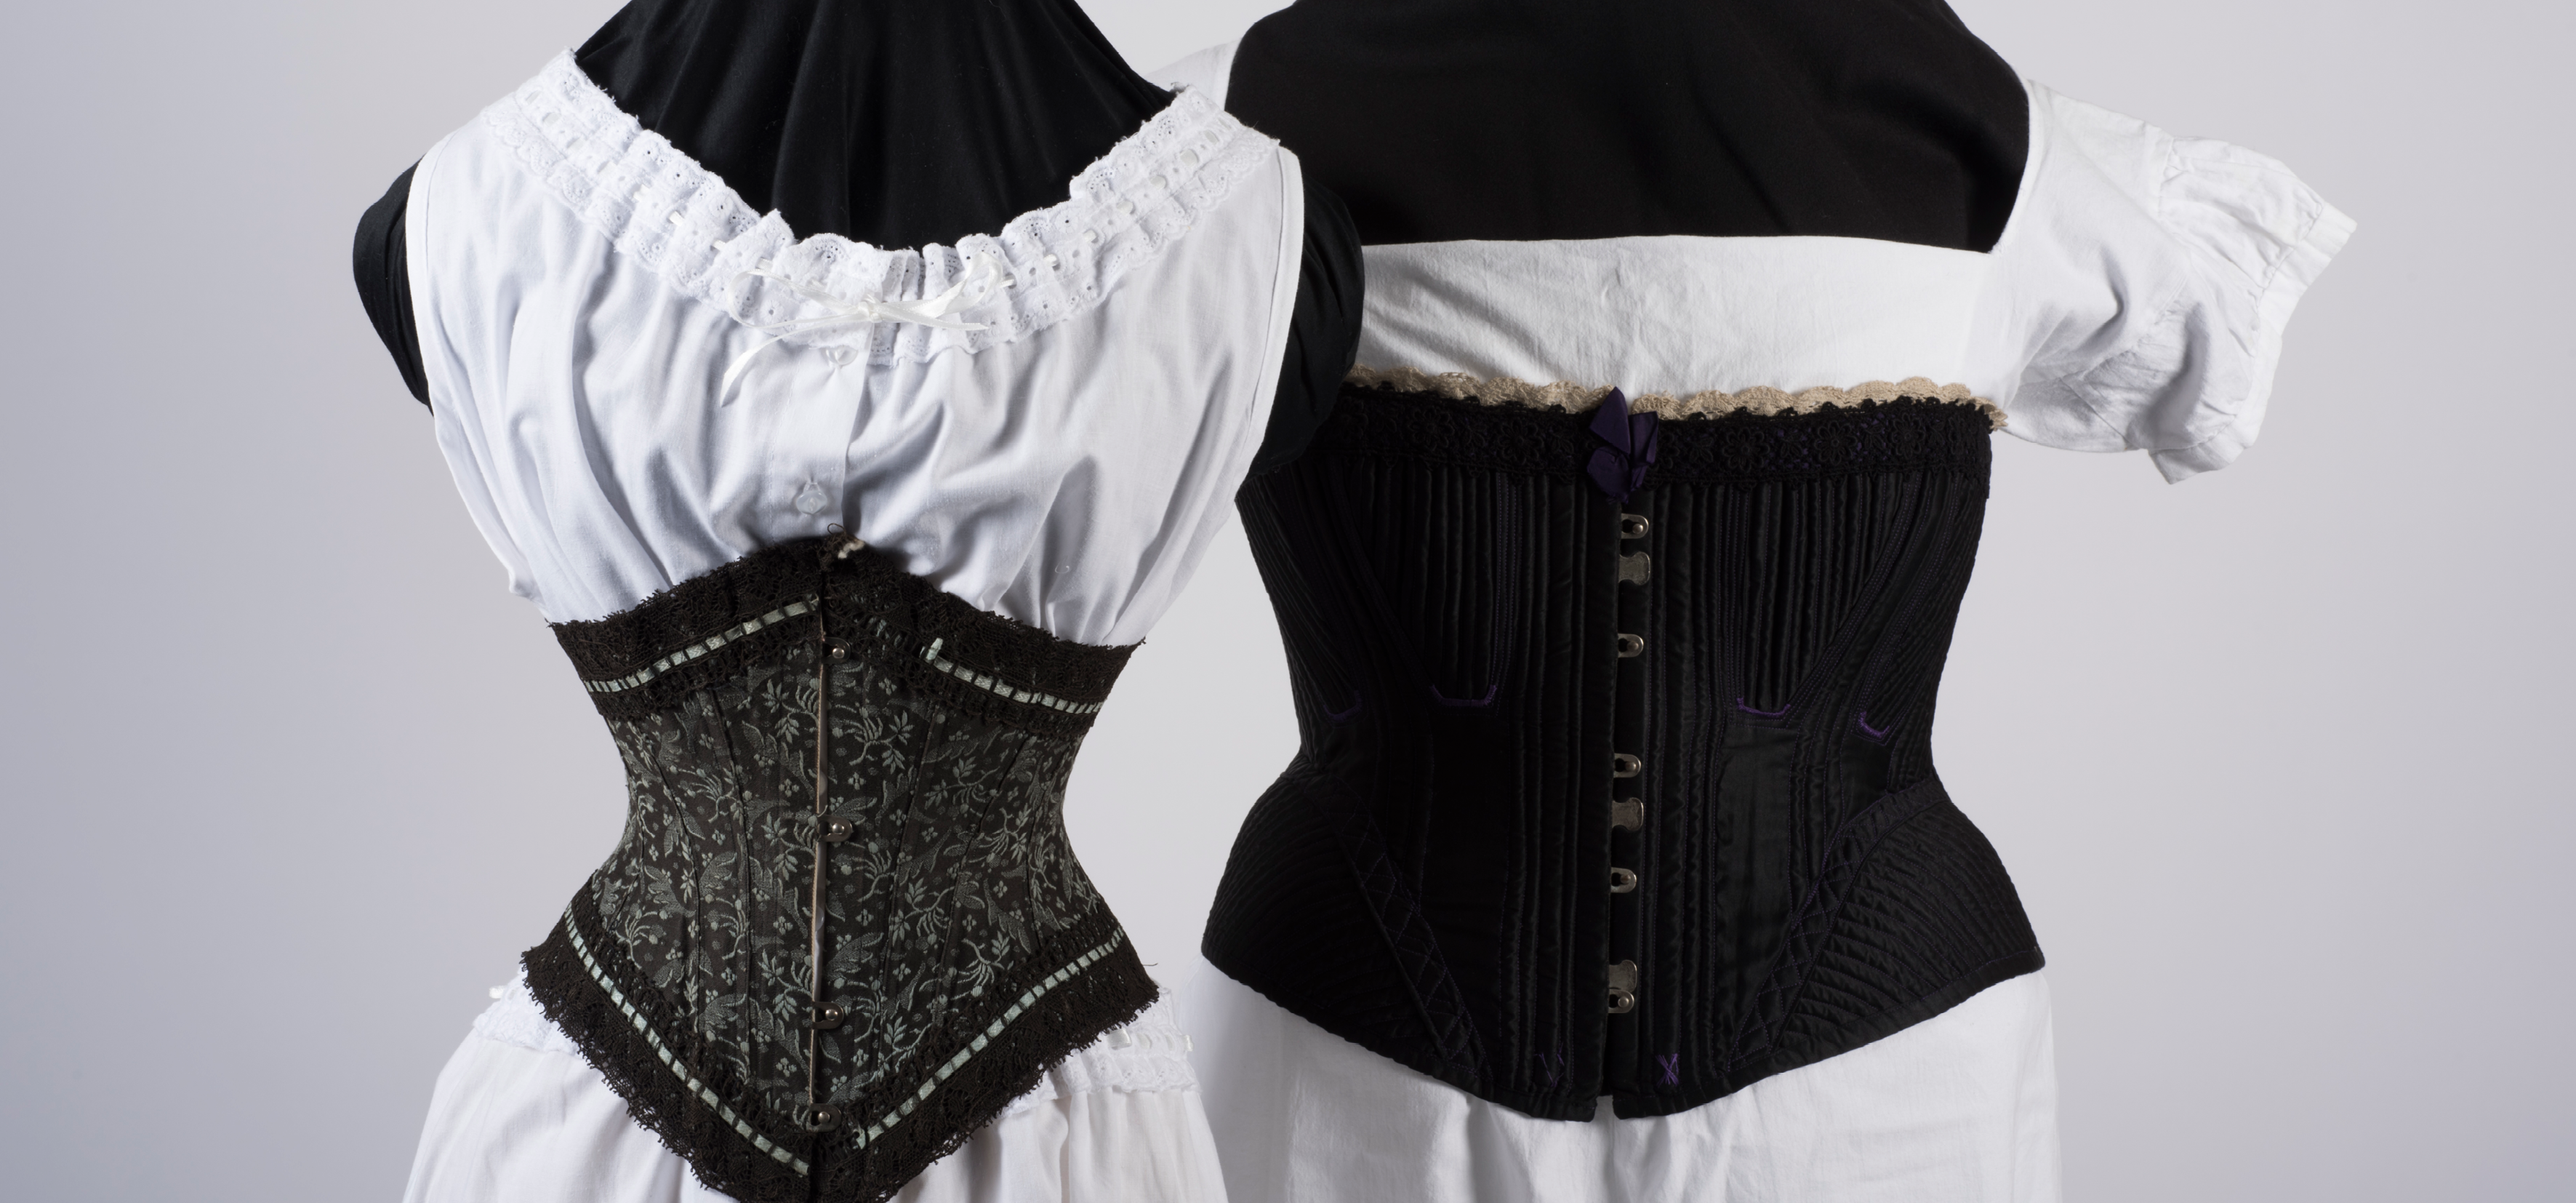 Corset Story UK - We all remember our first corset. Whether it was